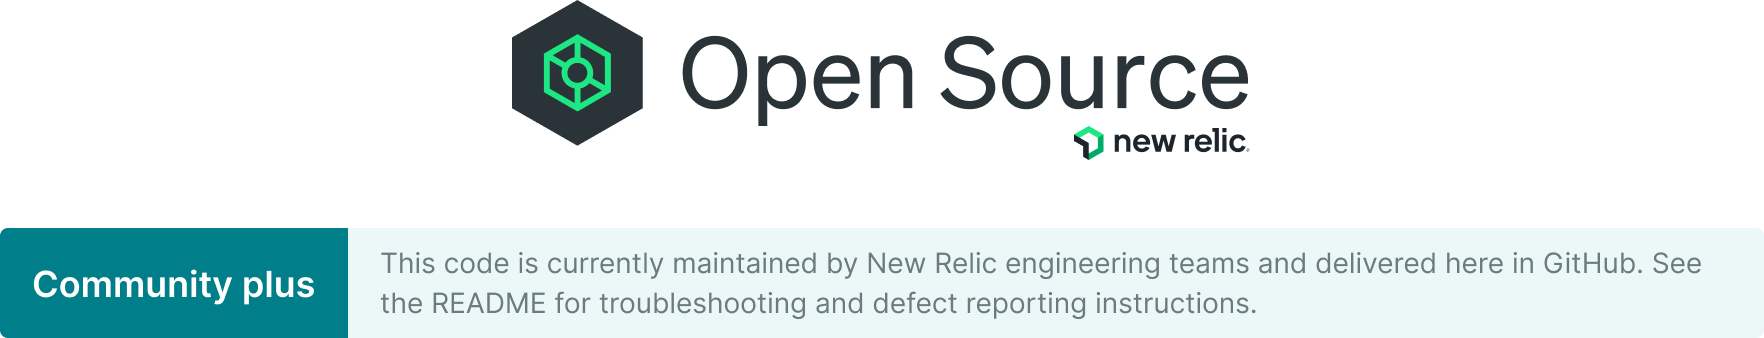 New Relic Open Source community plus project banner.